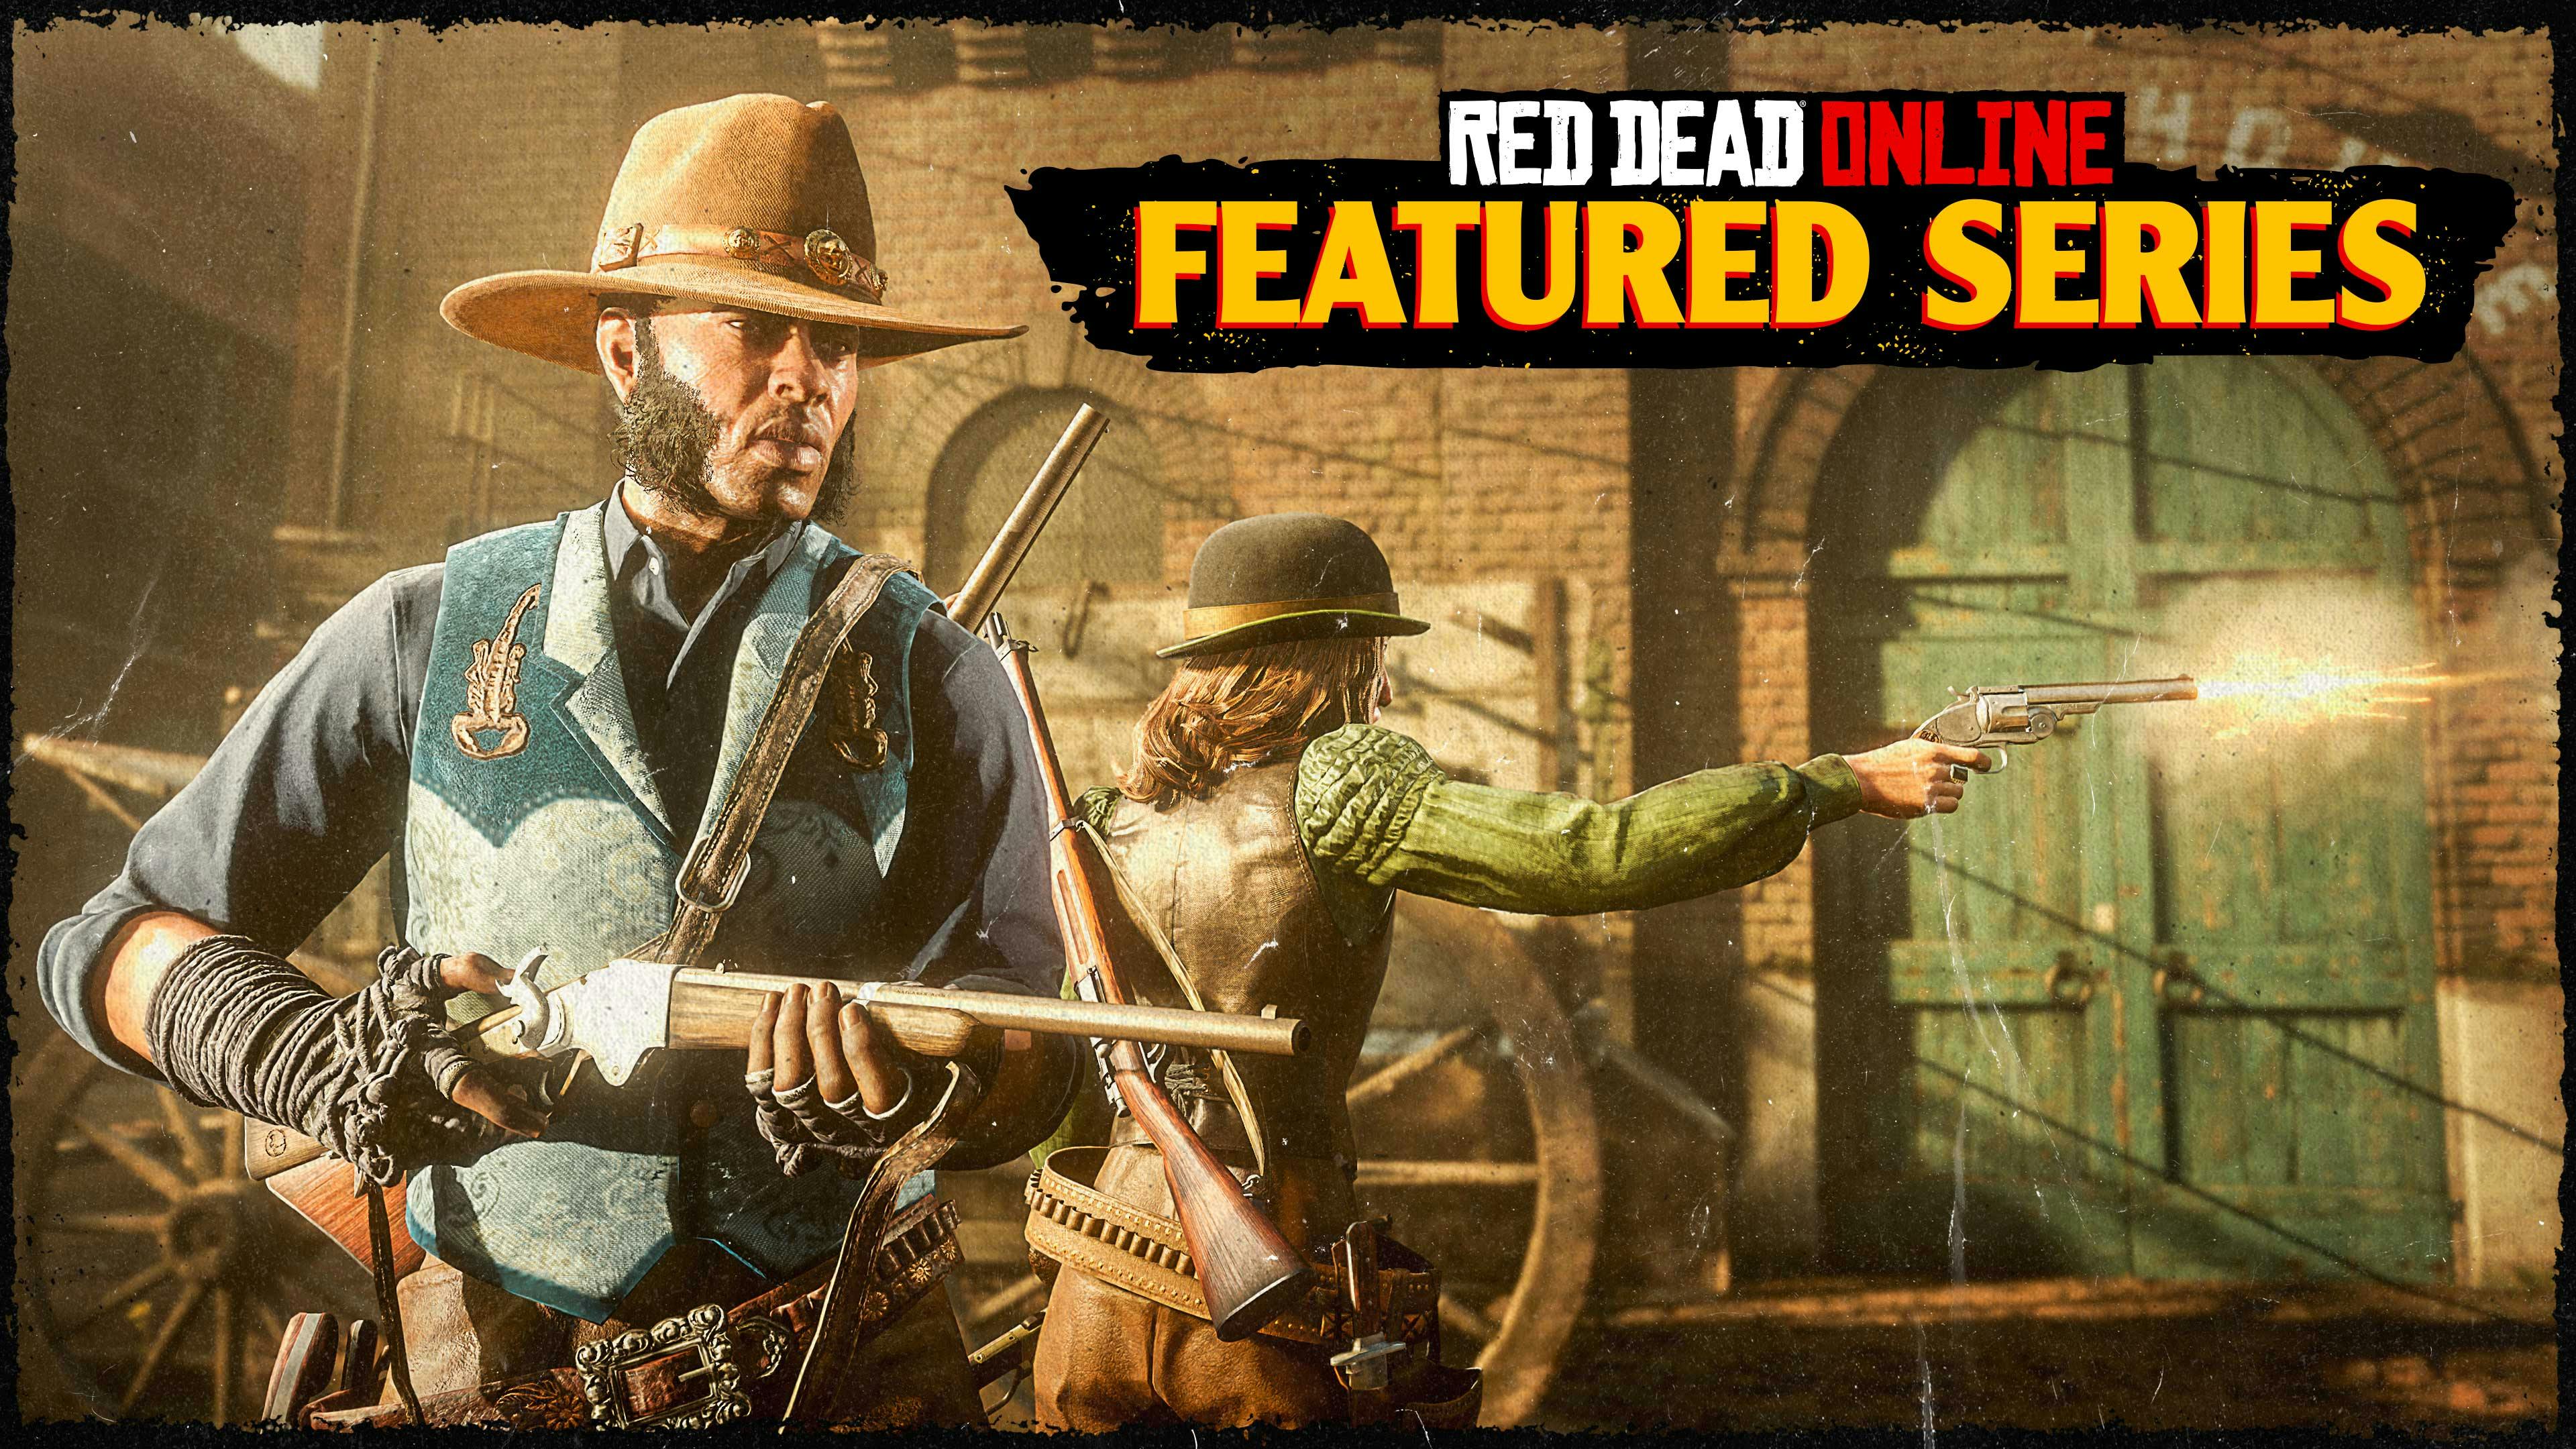 Featured Series in Red Dead Online